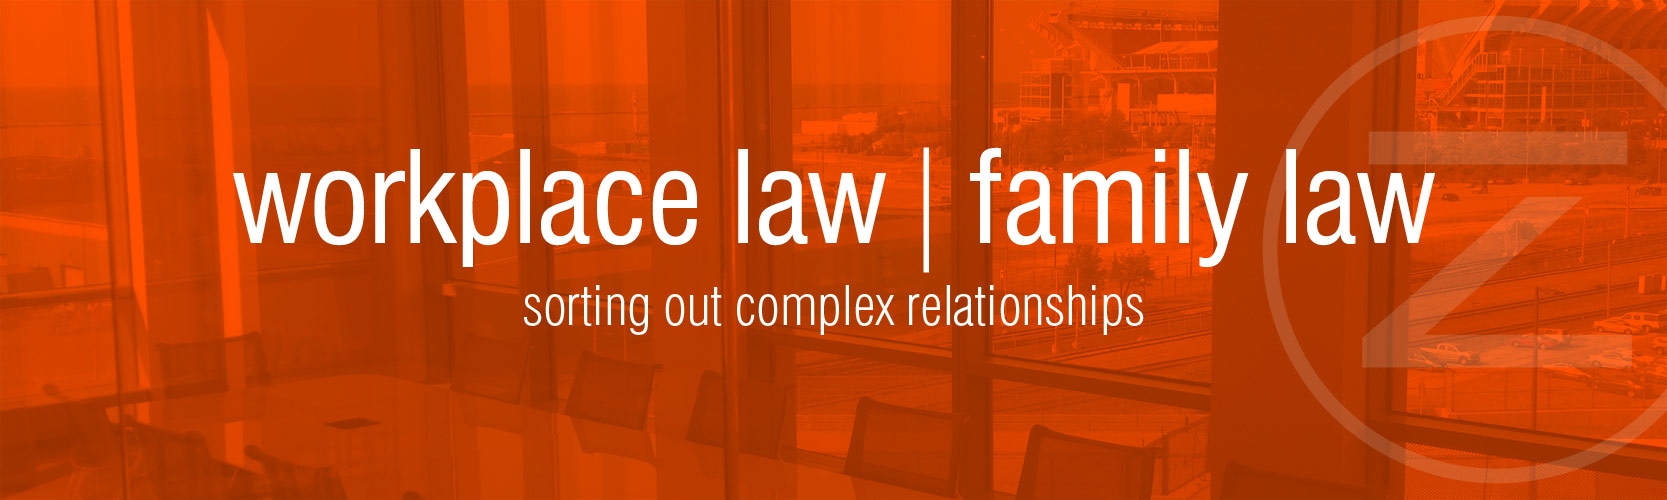 workplace law | family law - sorting out complex relationships